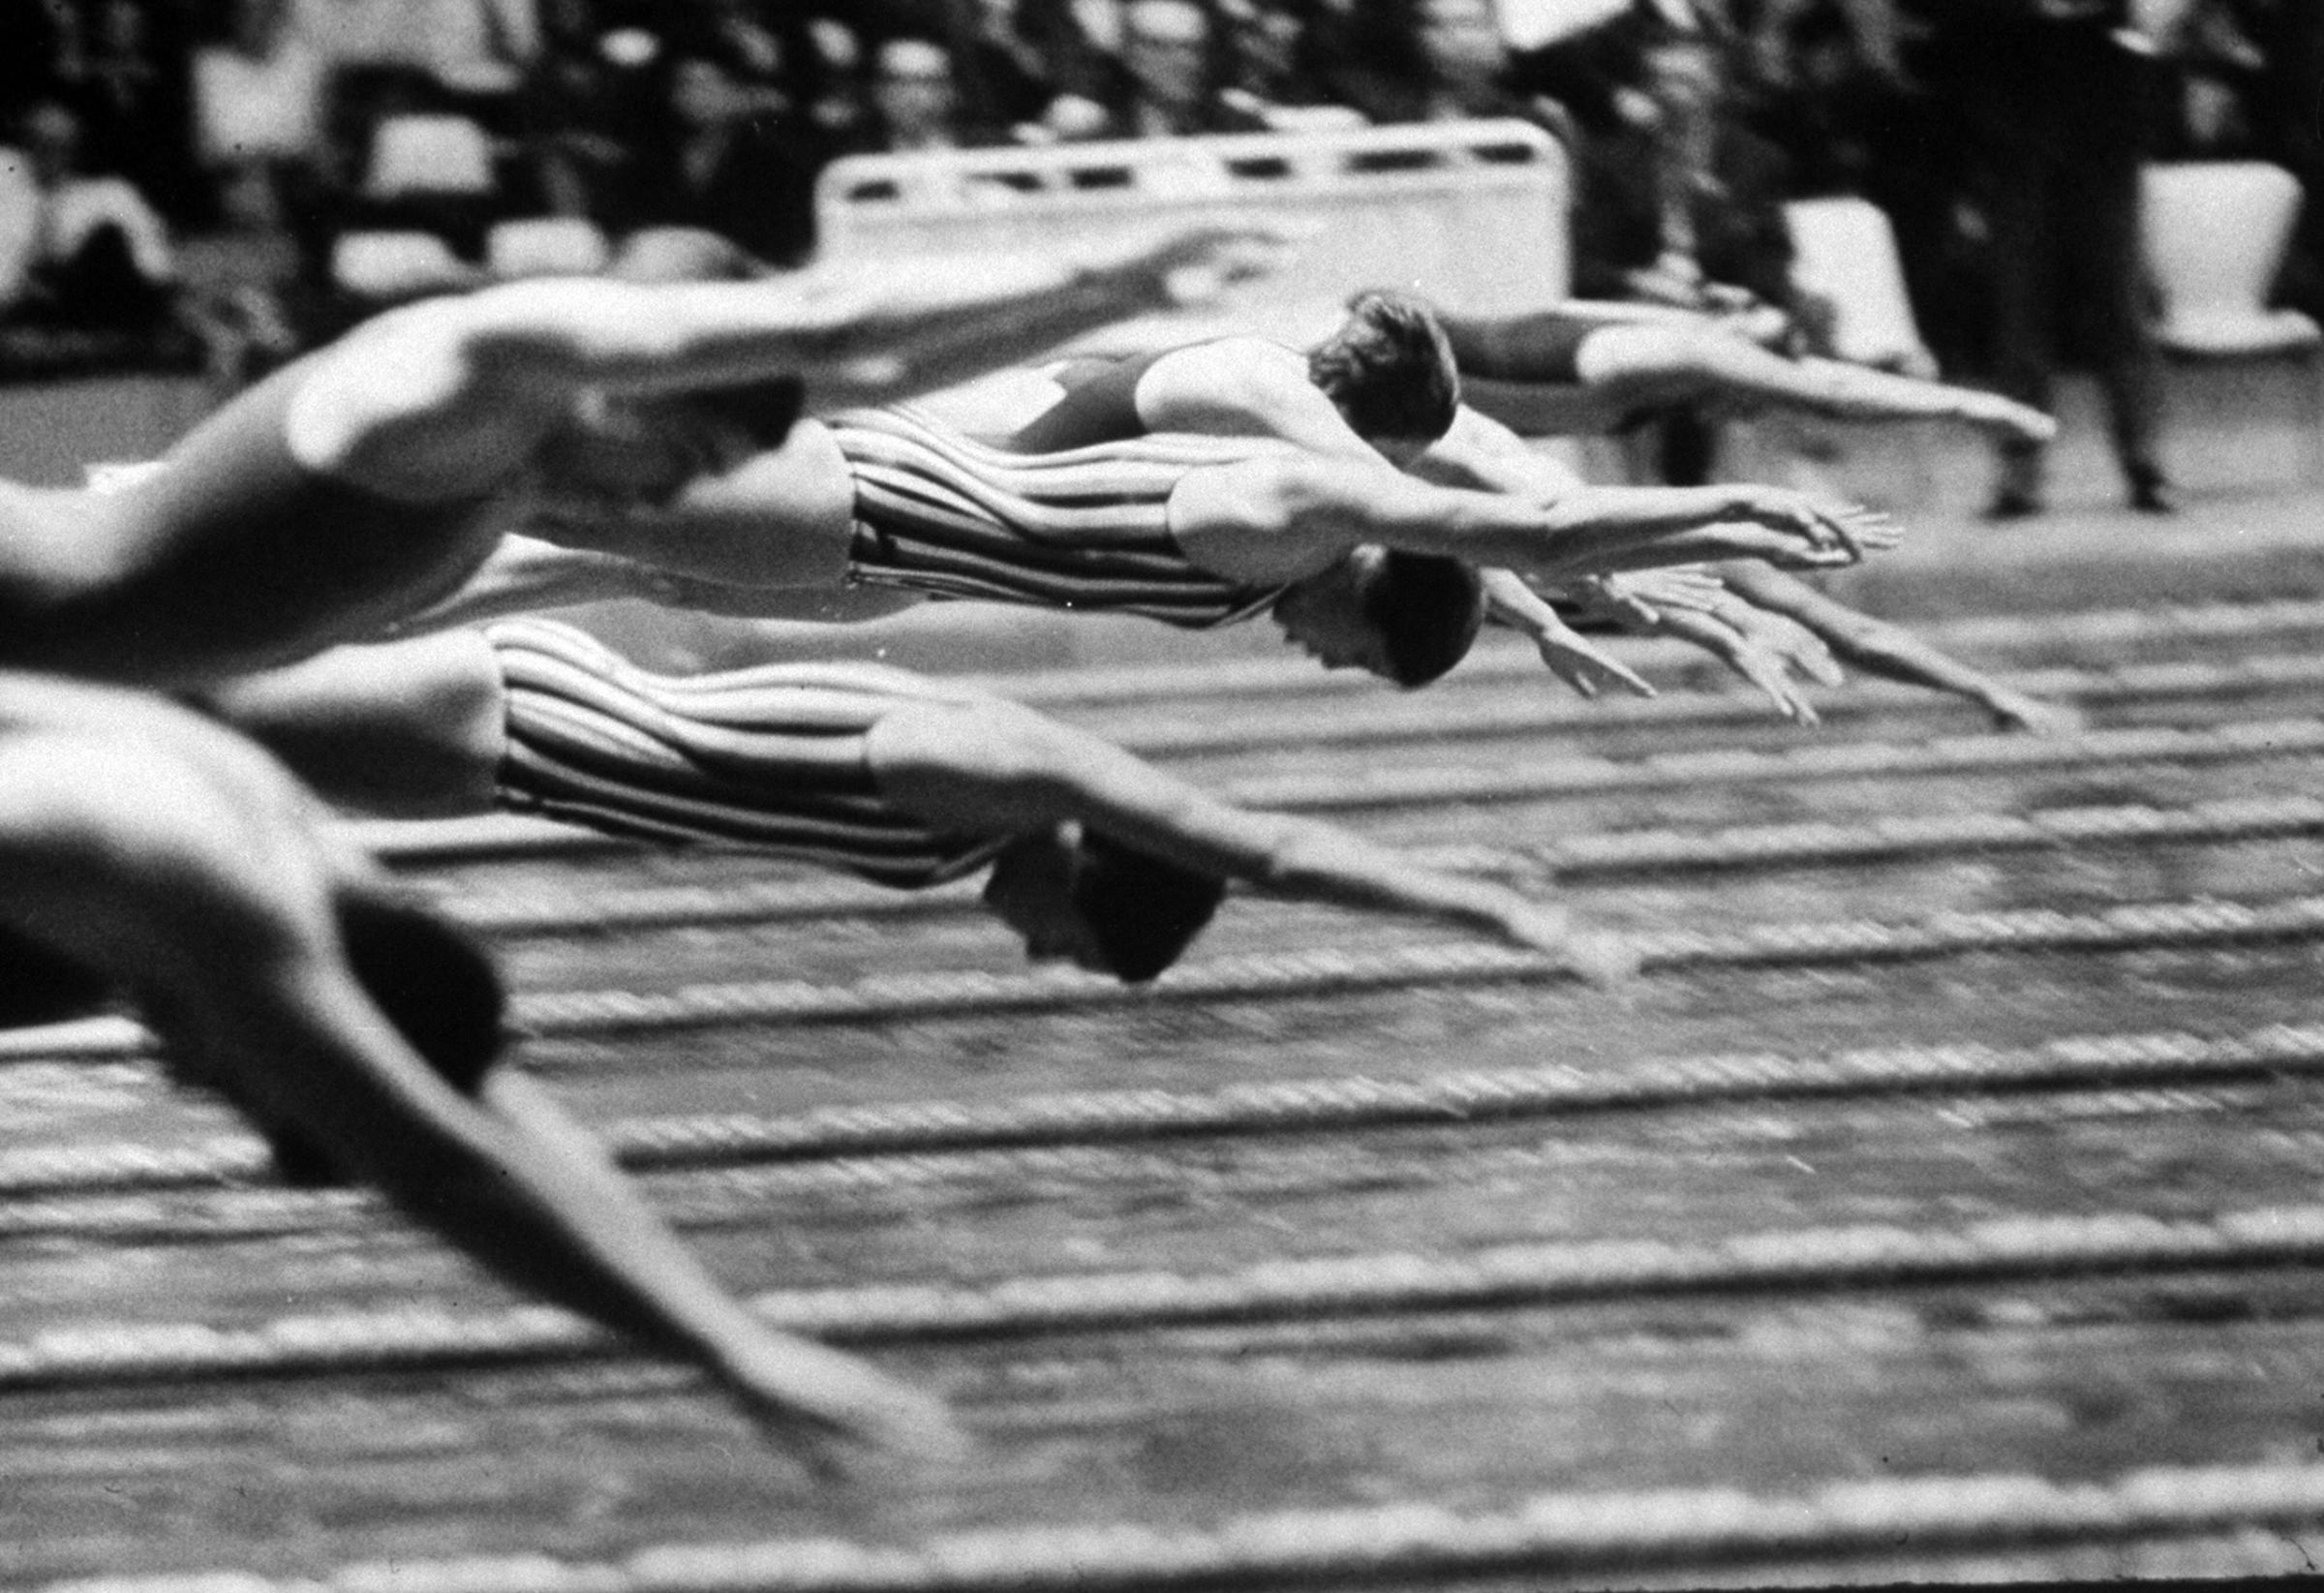 U. S. swimmers competing during the 1964 summer Olympics in Tokyo, Japan.